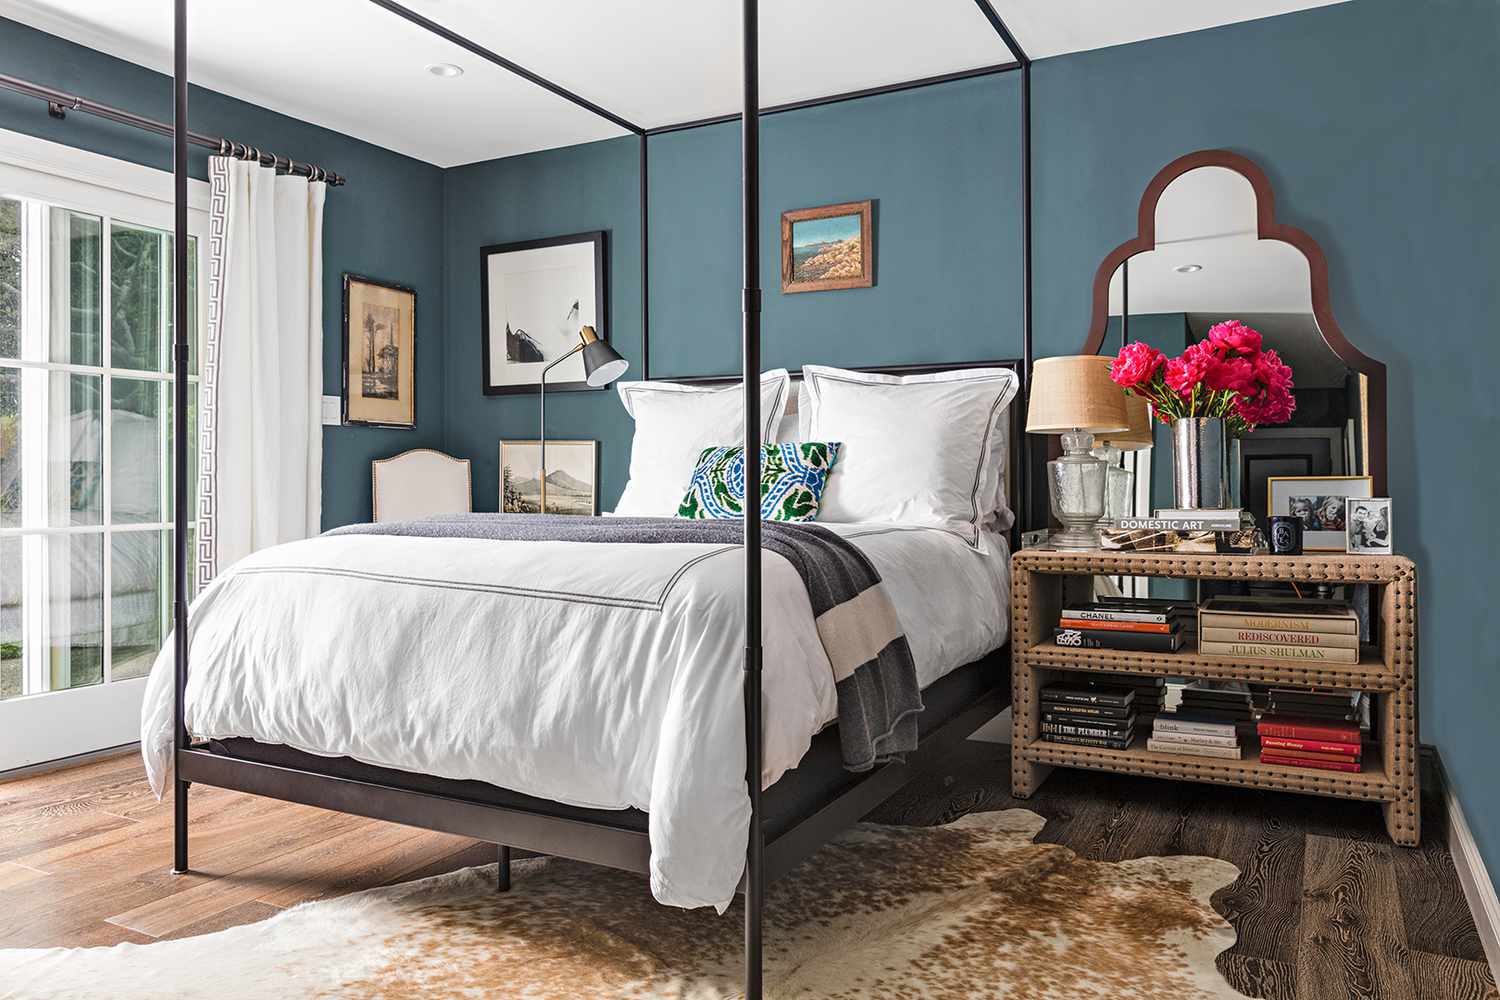 Tips for Getting a Guest Bedroom Ready